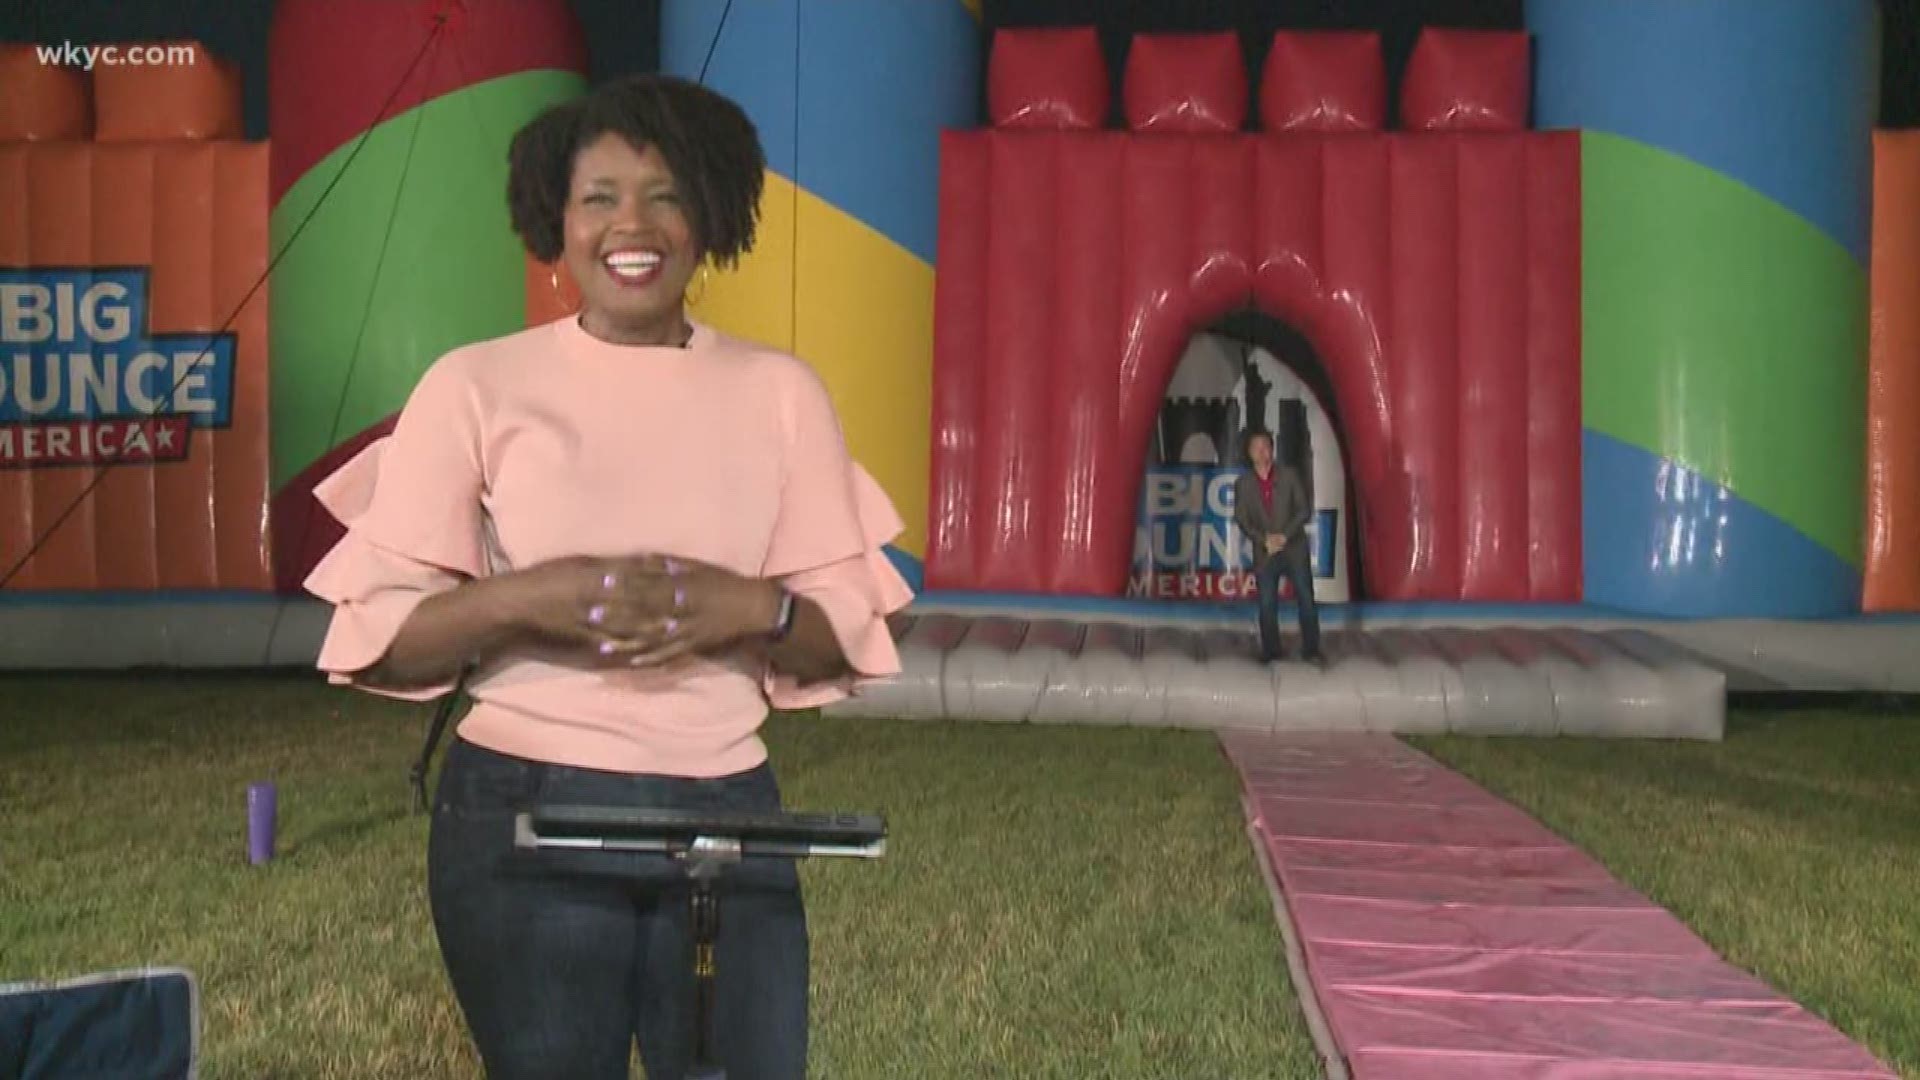 July 13, 2018: Tiffany Tarpley wasn't quite ready to take on the bounce house in North Ridgeville... Here's why.